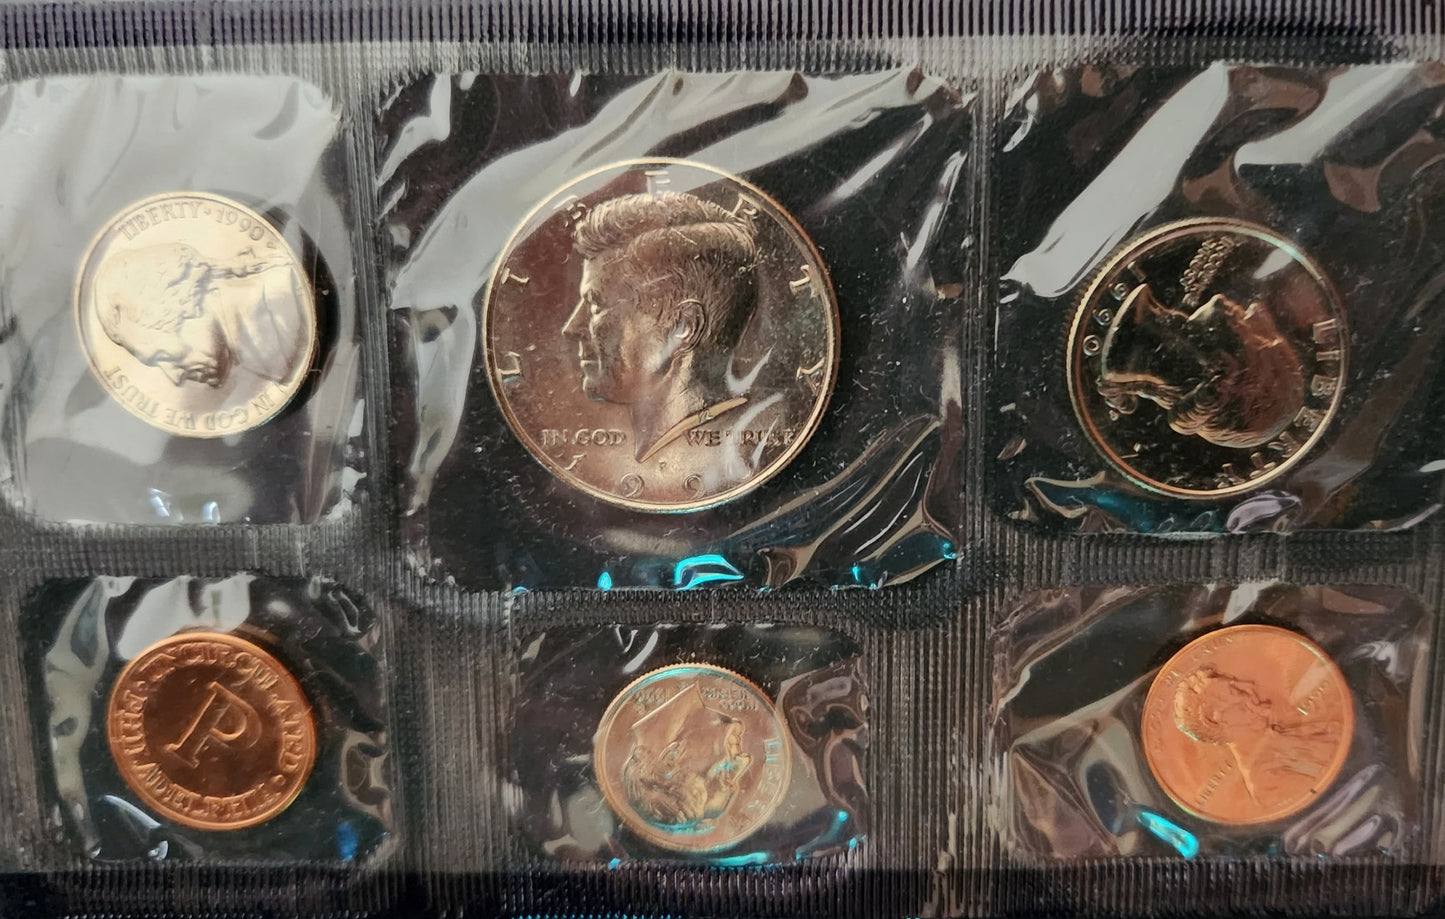 1990 United States Proof Set - With D and P Mint Marks